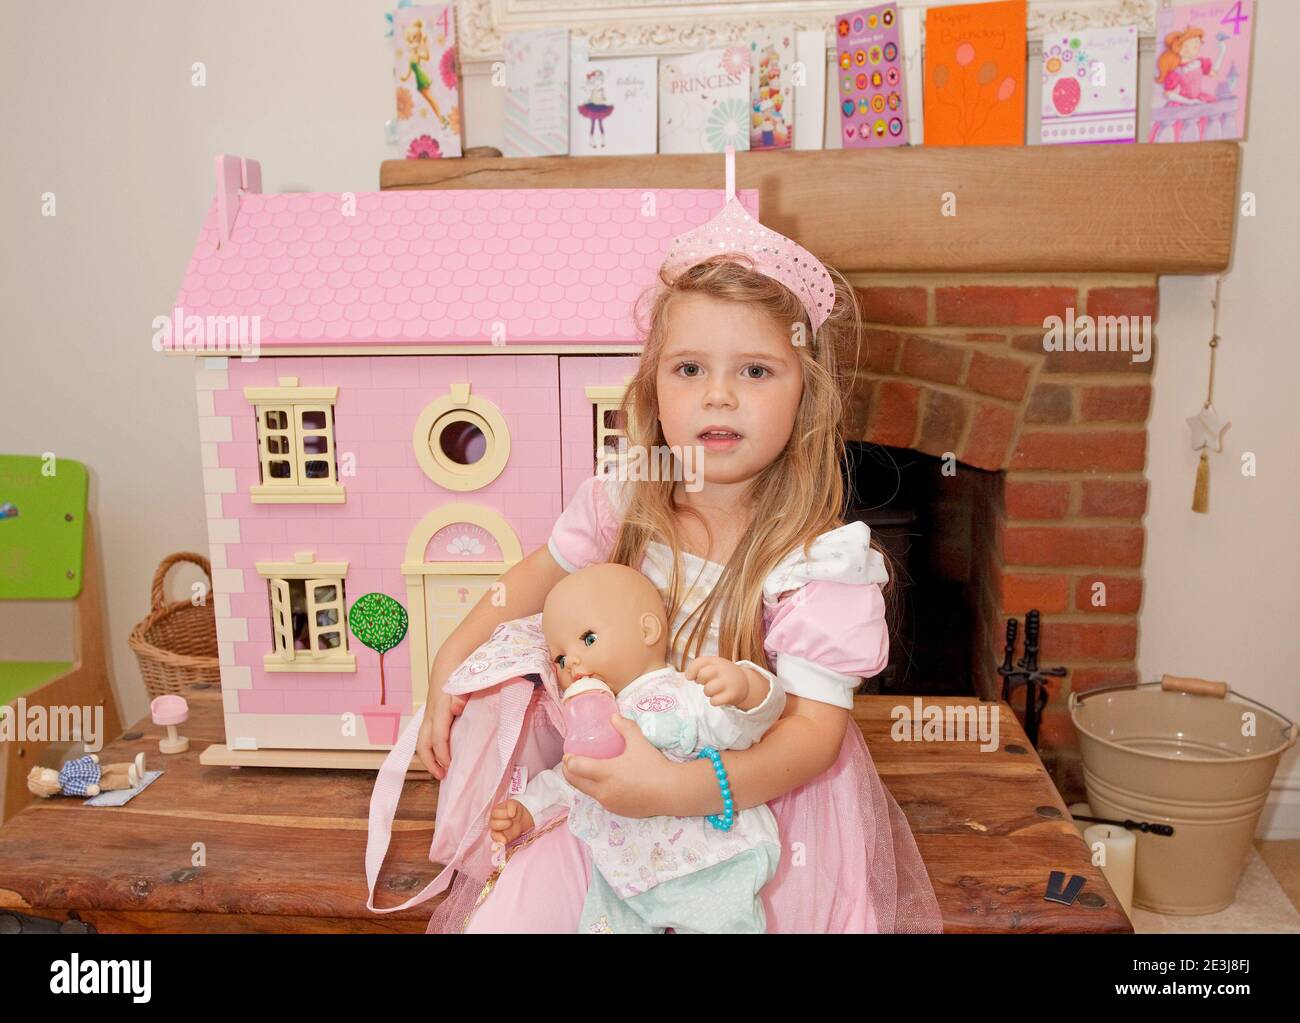 Young girl sat with her birthday presents Stock Photo